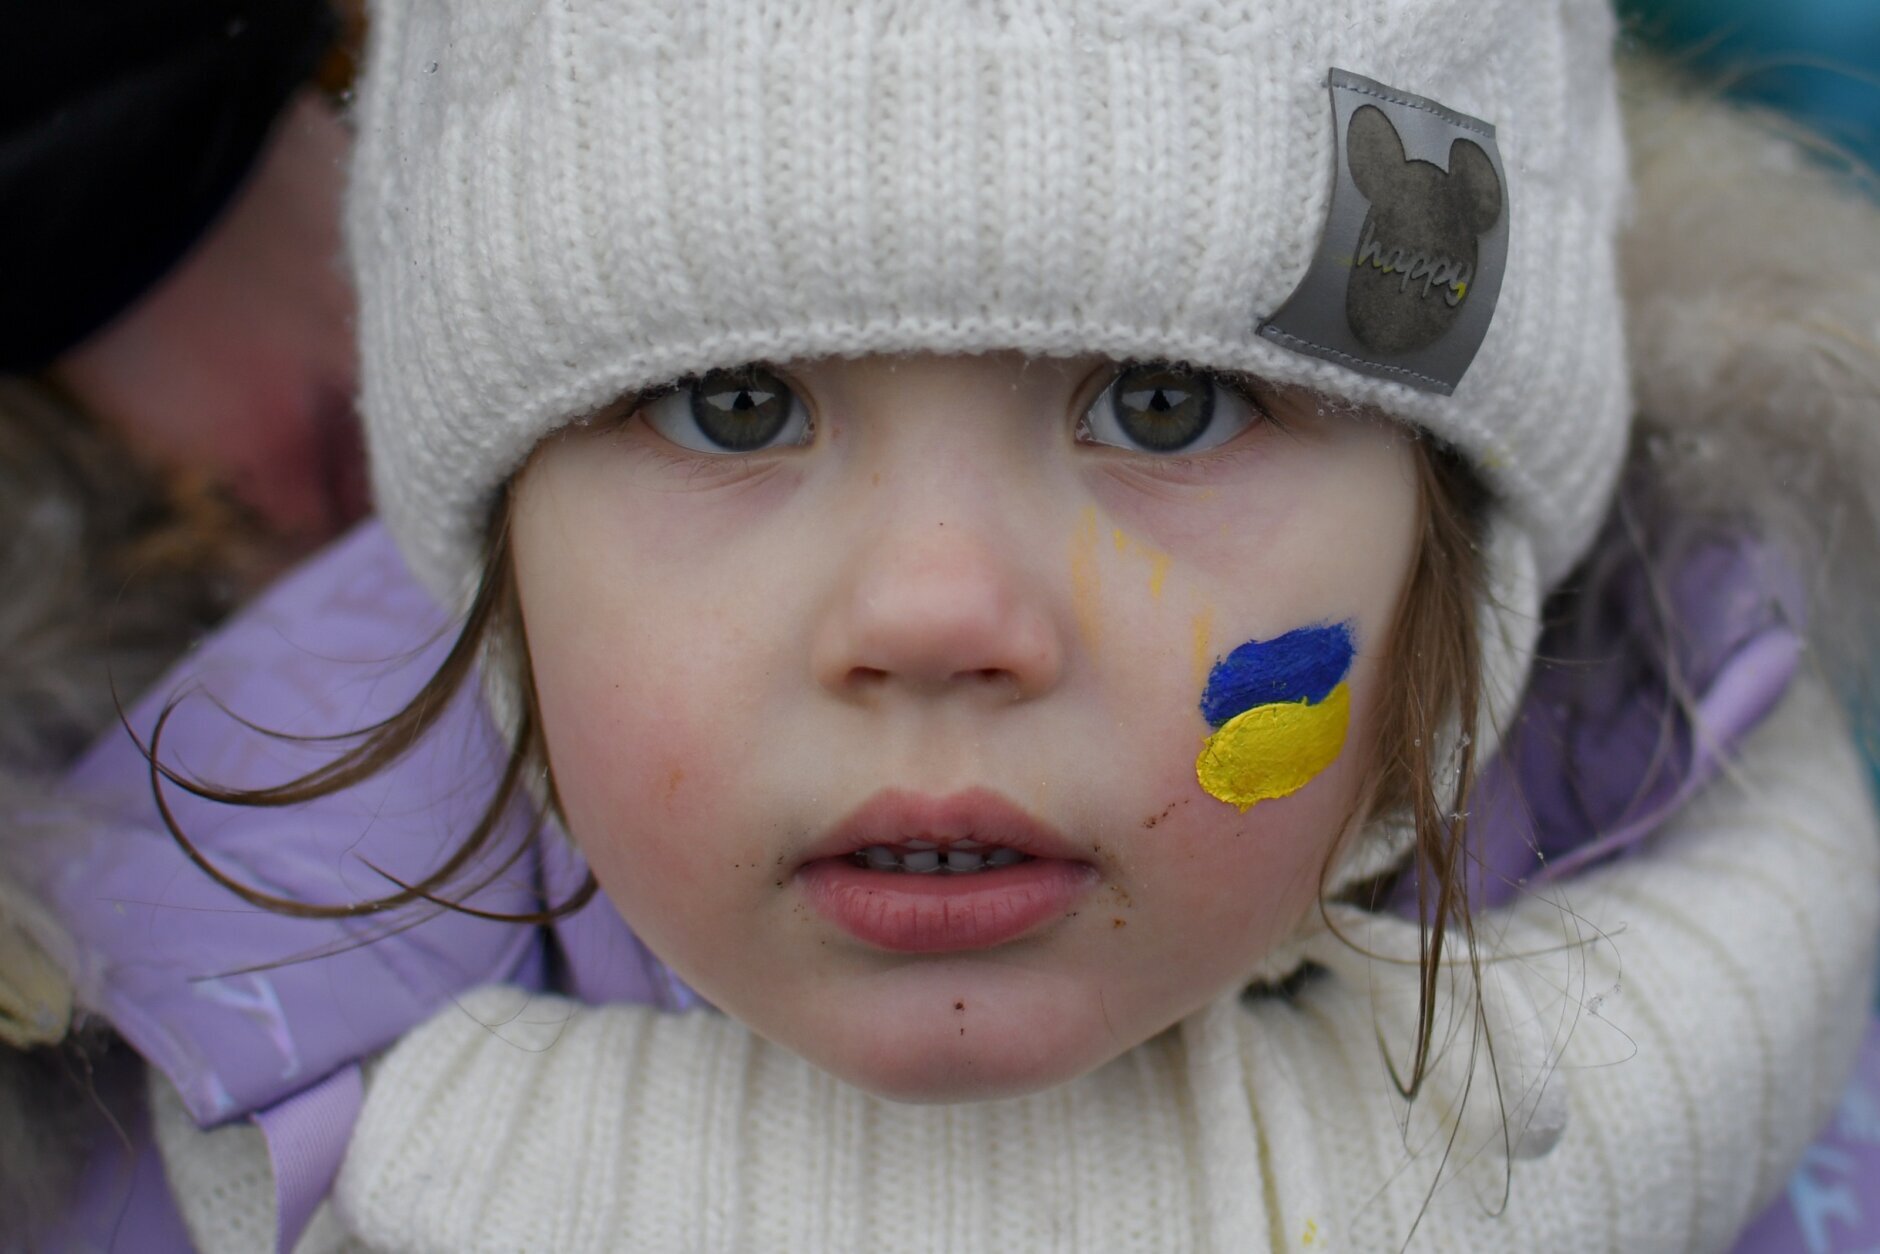 Zlata, 3 and half year-old, fleeing the conflict from neighbouring Ukraine with her face painted in the colours of the Ukrainian flag stands at the Romanian-Ukrainian border, in Siret, Romania, Thursday, March 3, 2022. The number of people sent fleeing Ukraine by Russia's invasion topped 1 million on Wednesday, the swiftest refugee exodus this century, the United Nations said, as Russian forces kept up their bombardment of the country's second-biggest city, Kharkiv, and laid siege to two strategic seaports. (AP Photo/Andreea Alexandru)